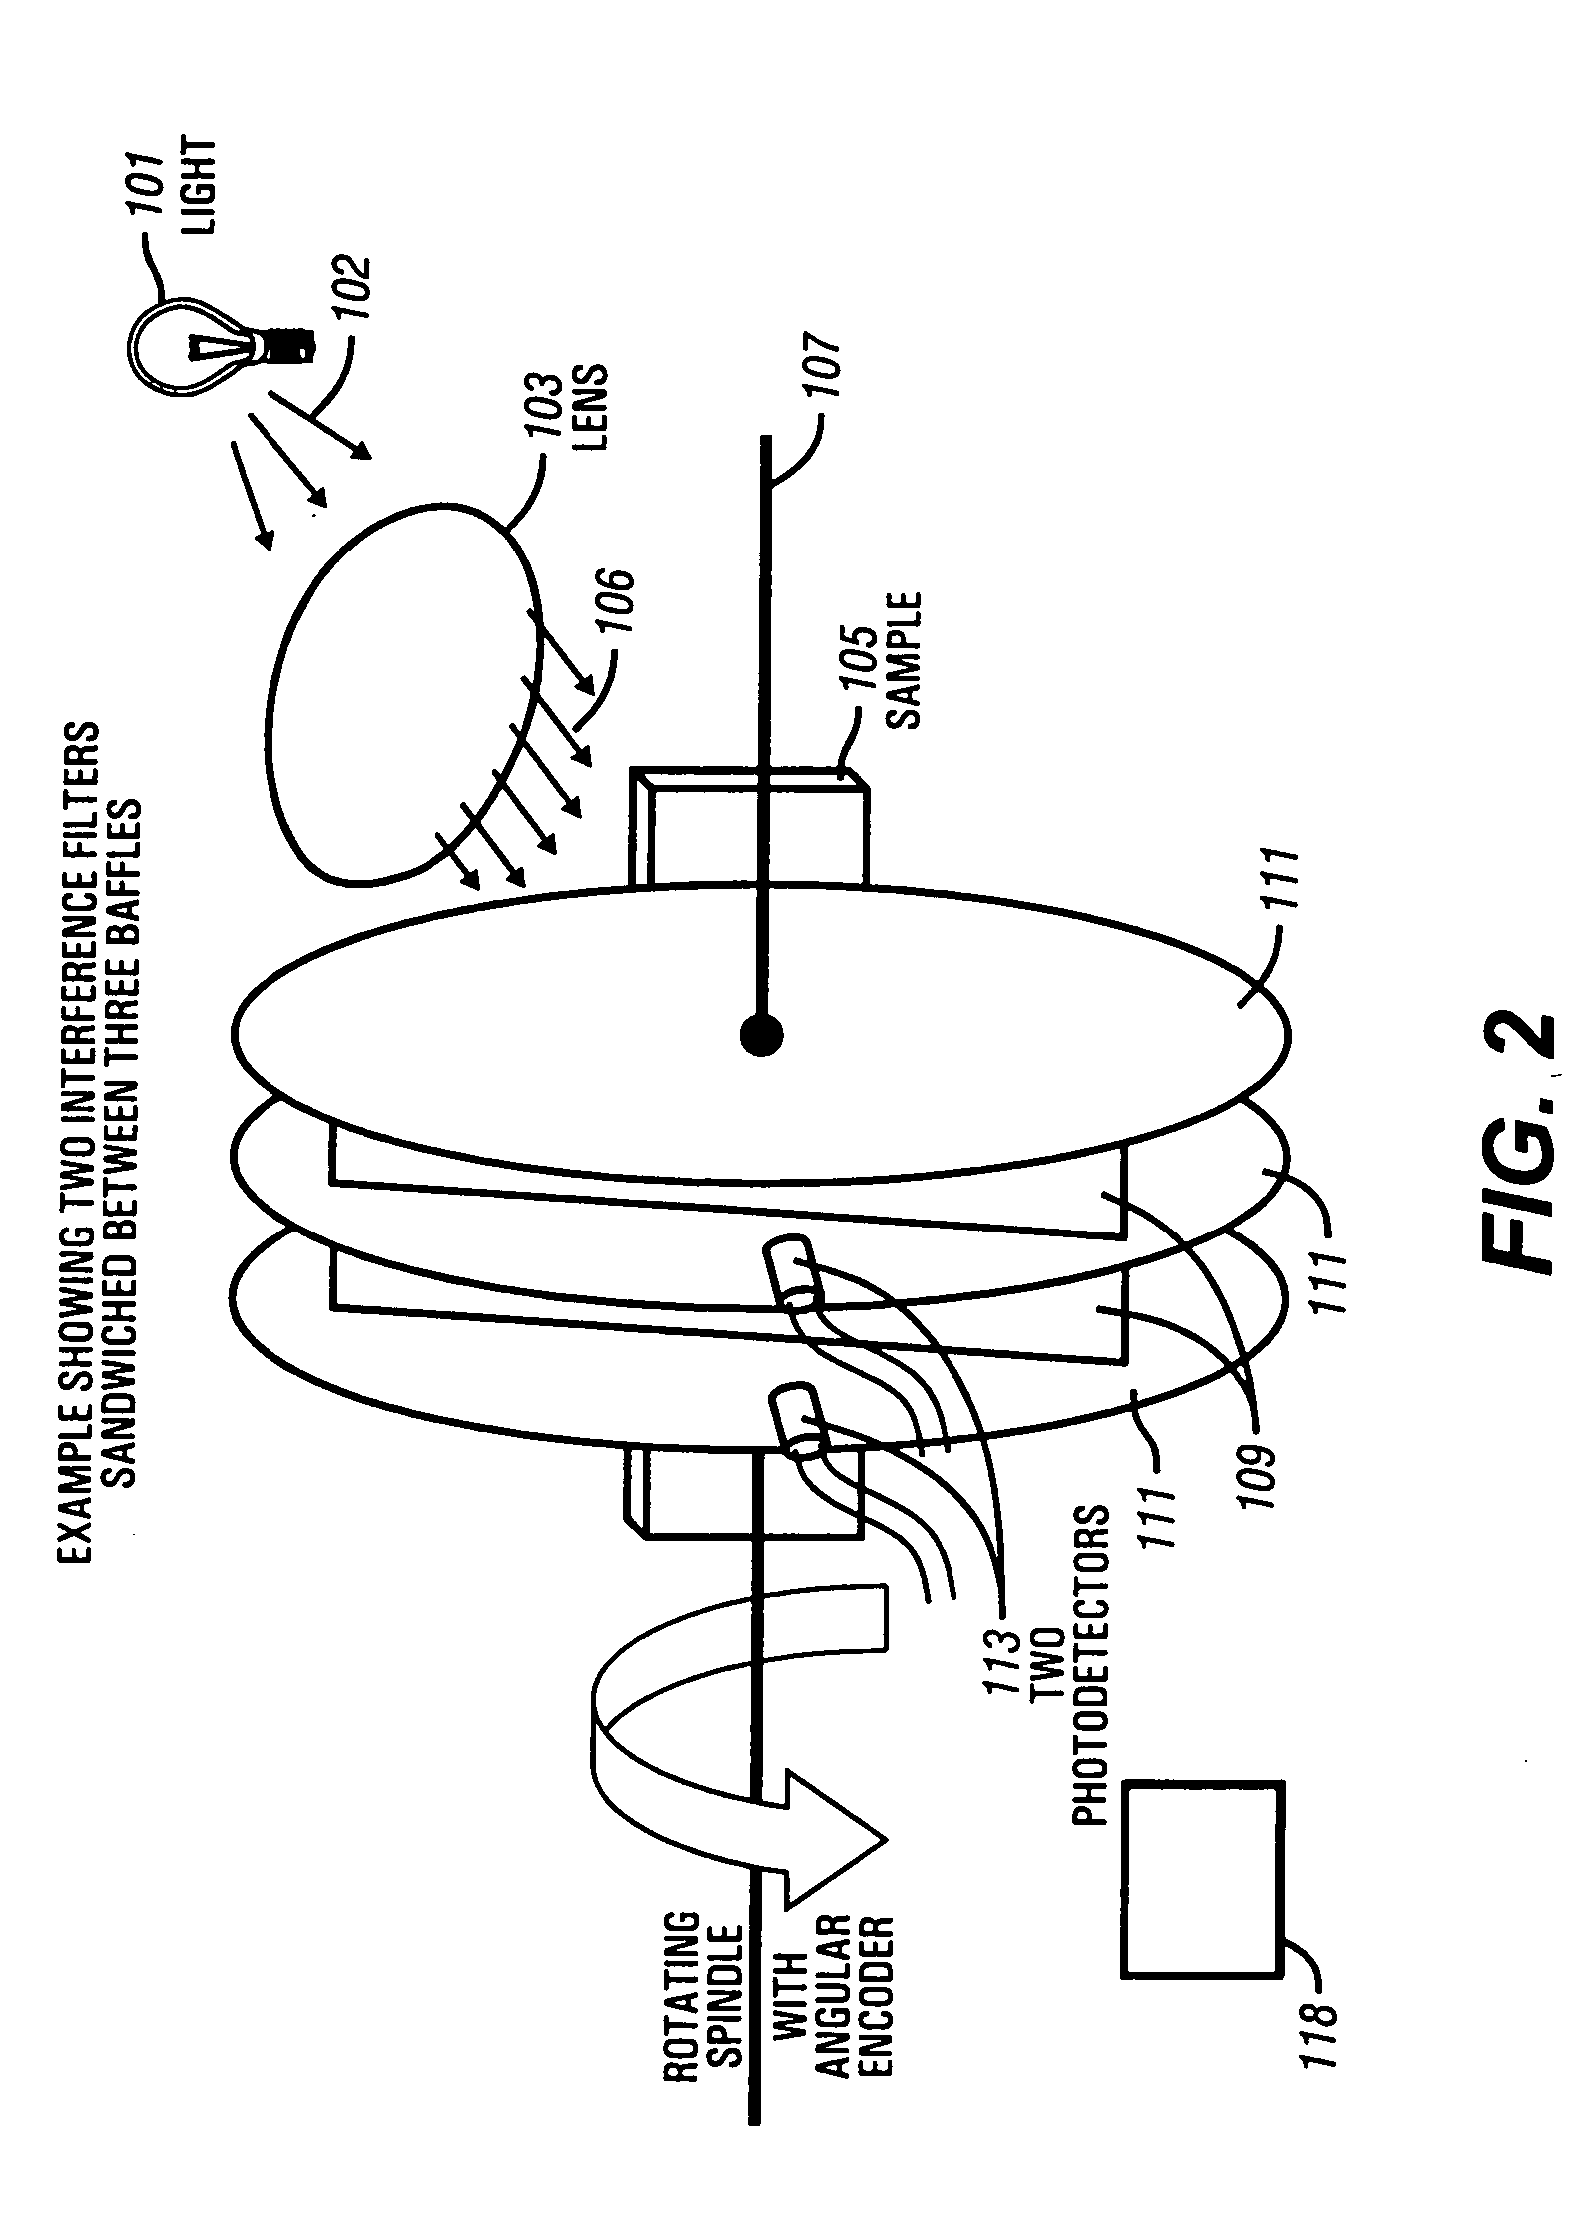 Method and apparatus for a high resolution downhole spectrometer